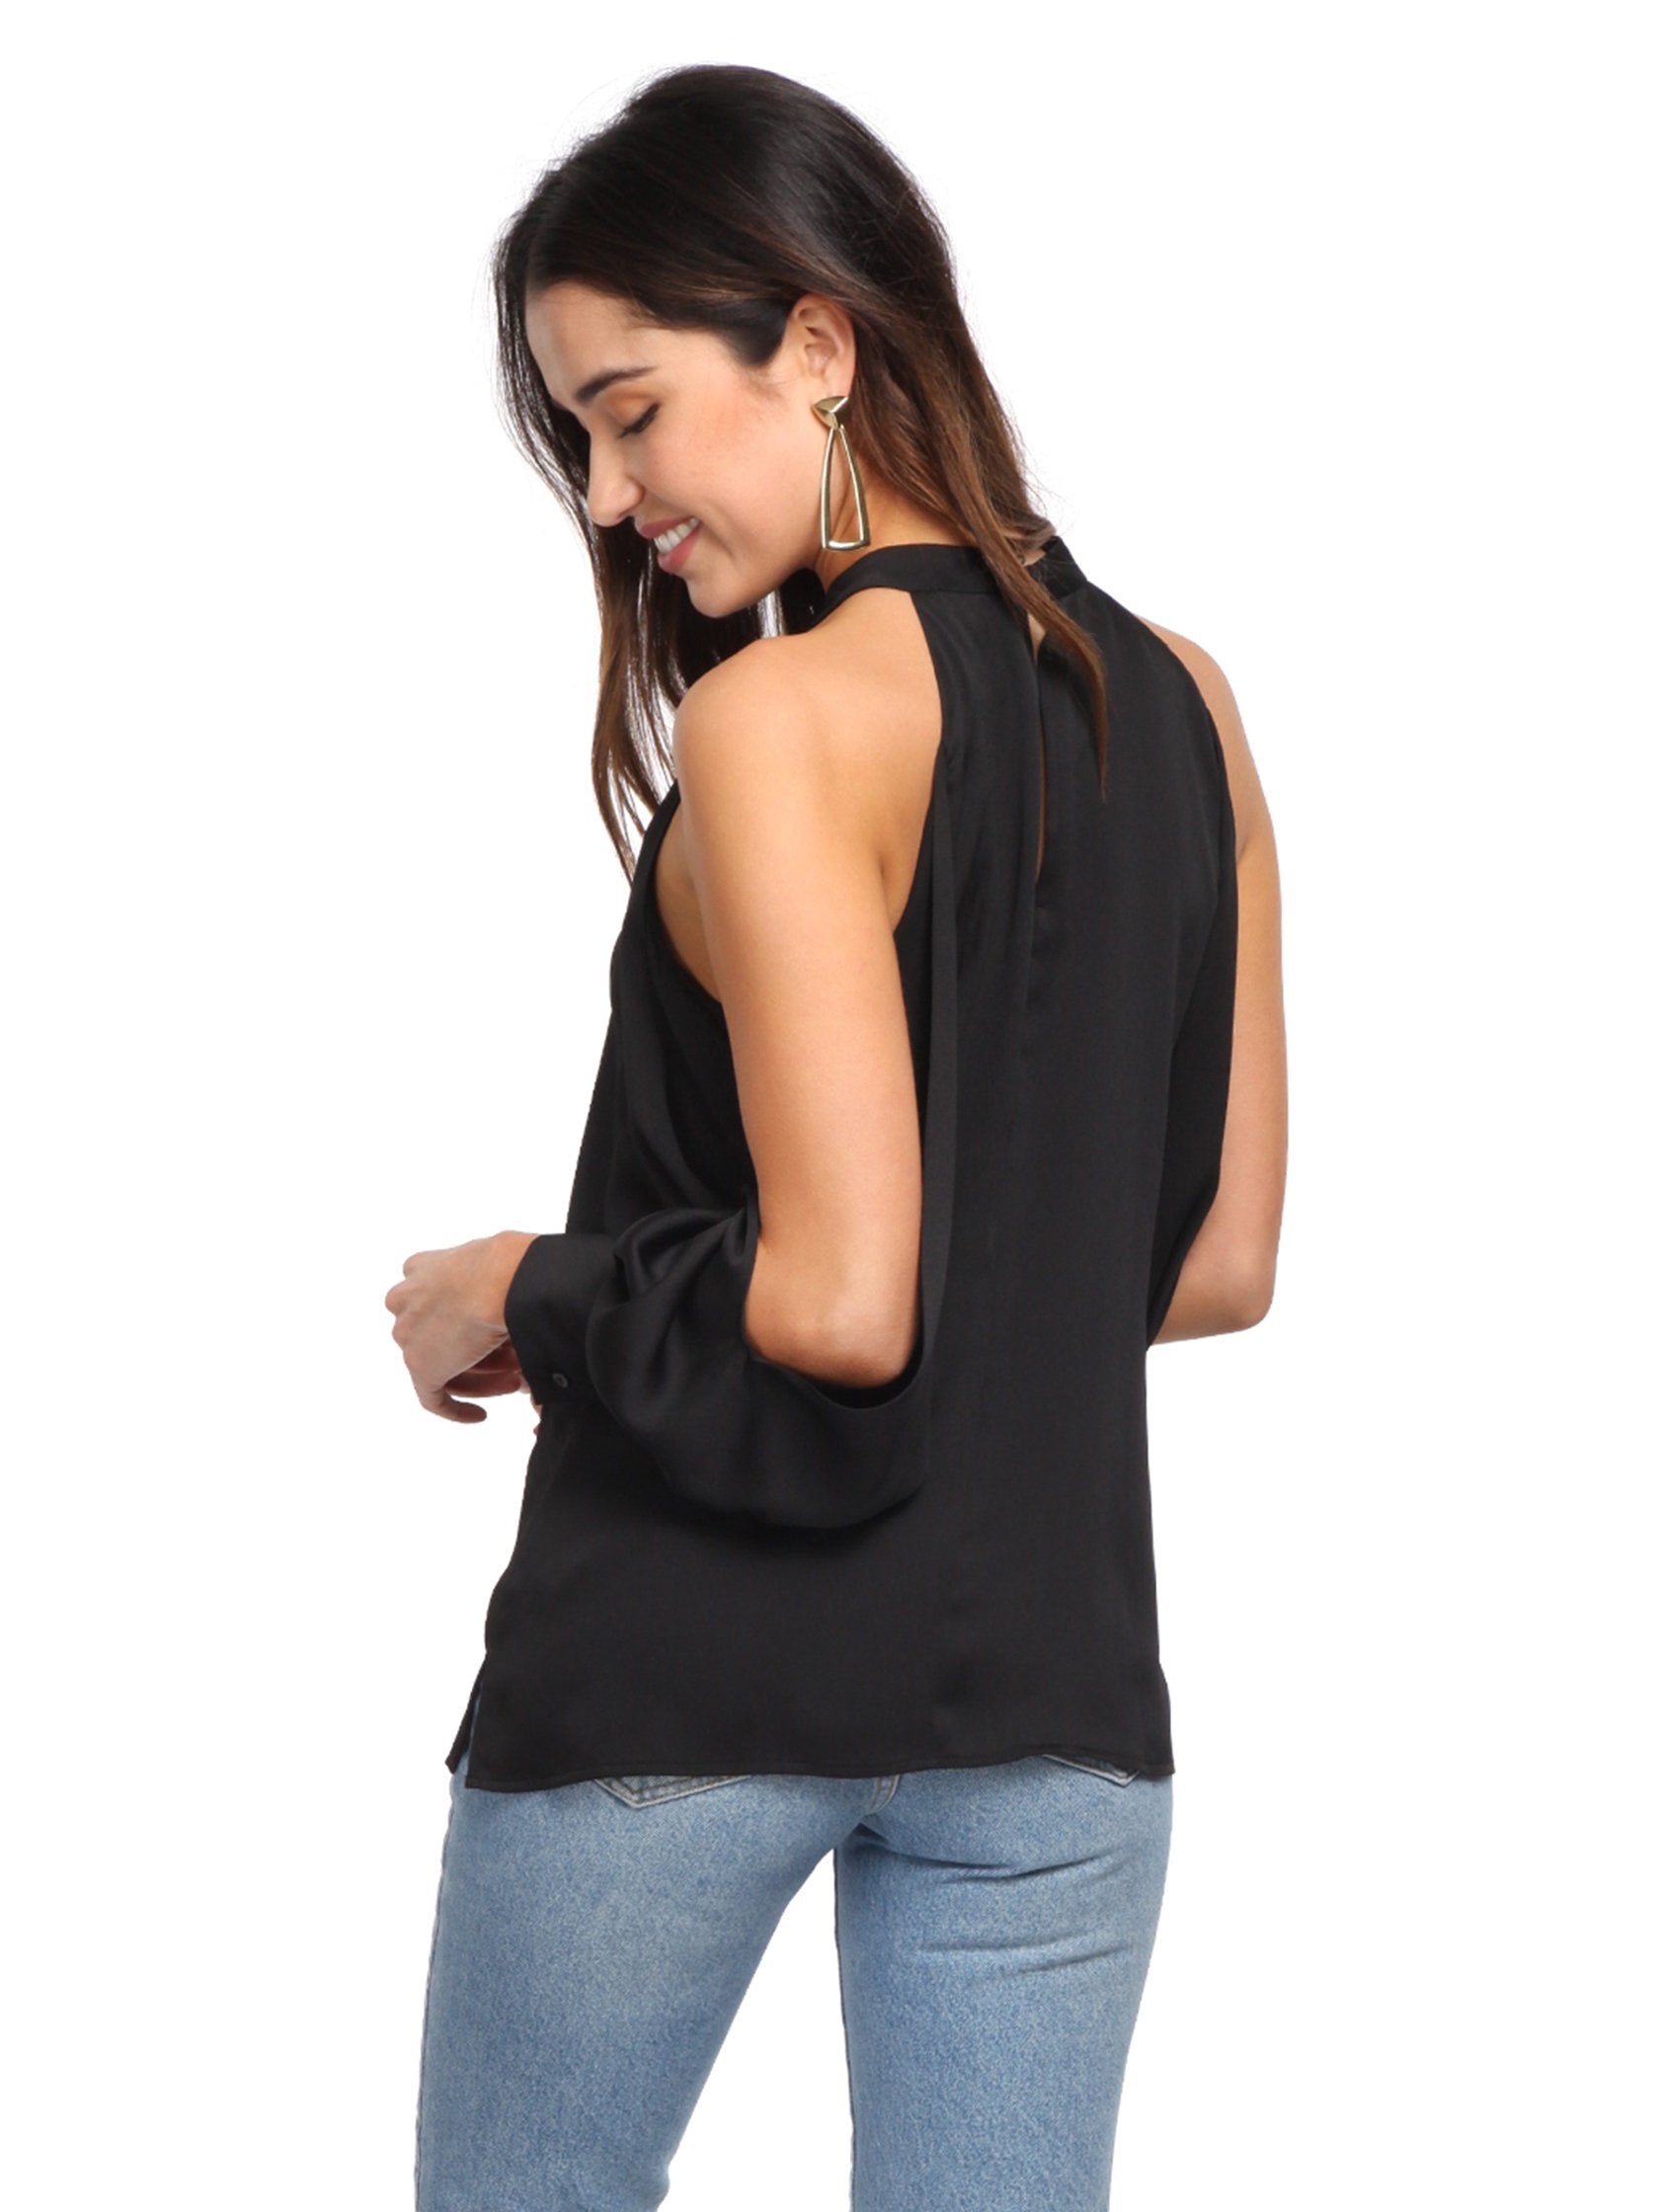 Women outfit in a top rental from 1.STATE called Cold Shoulder Blouson Sleeve Blouse